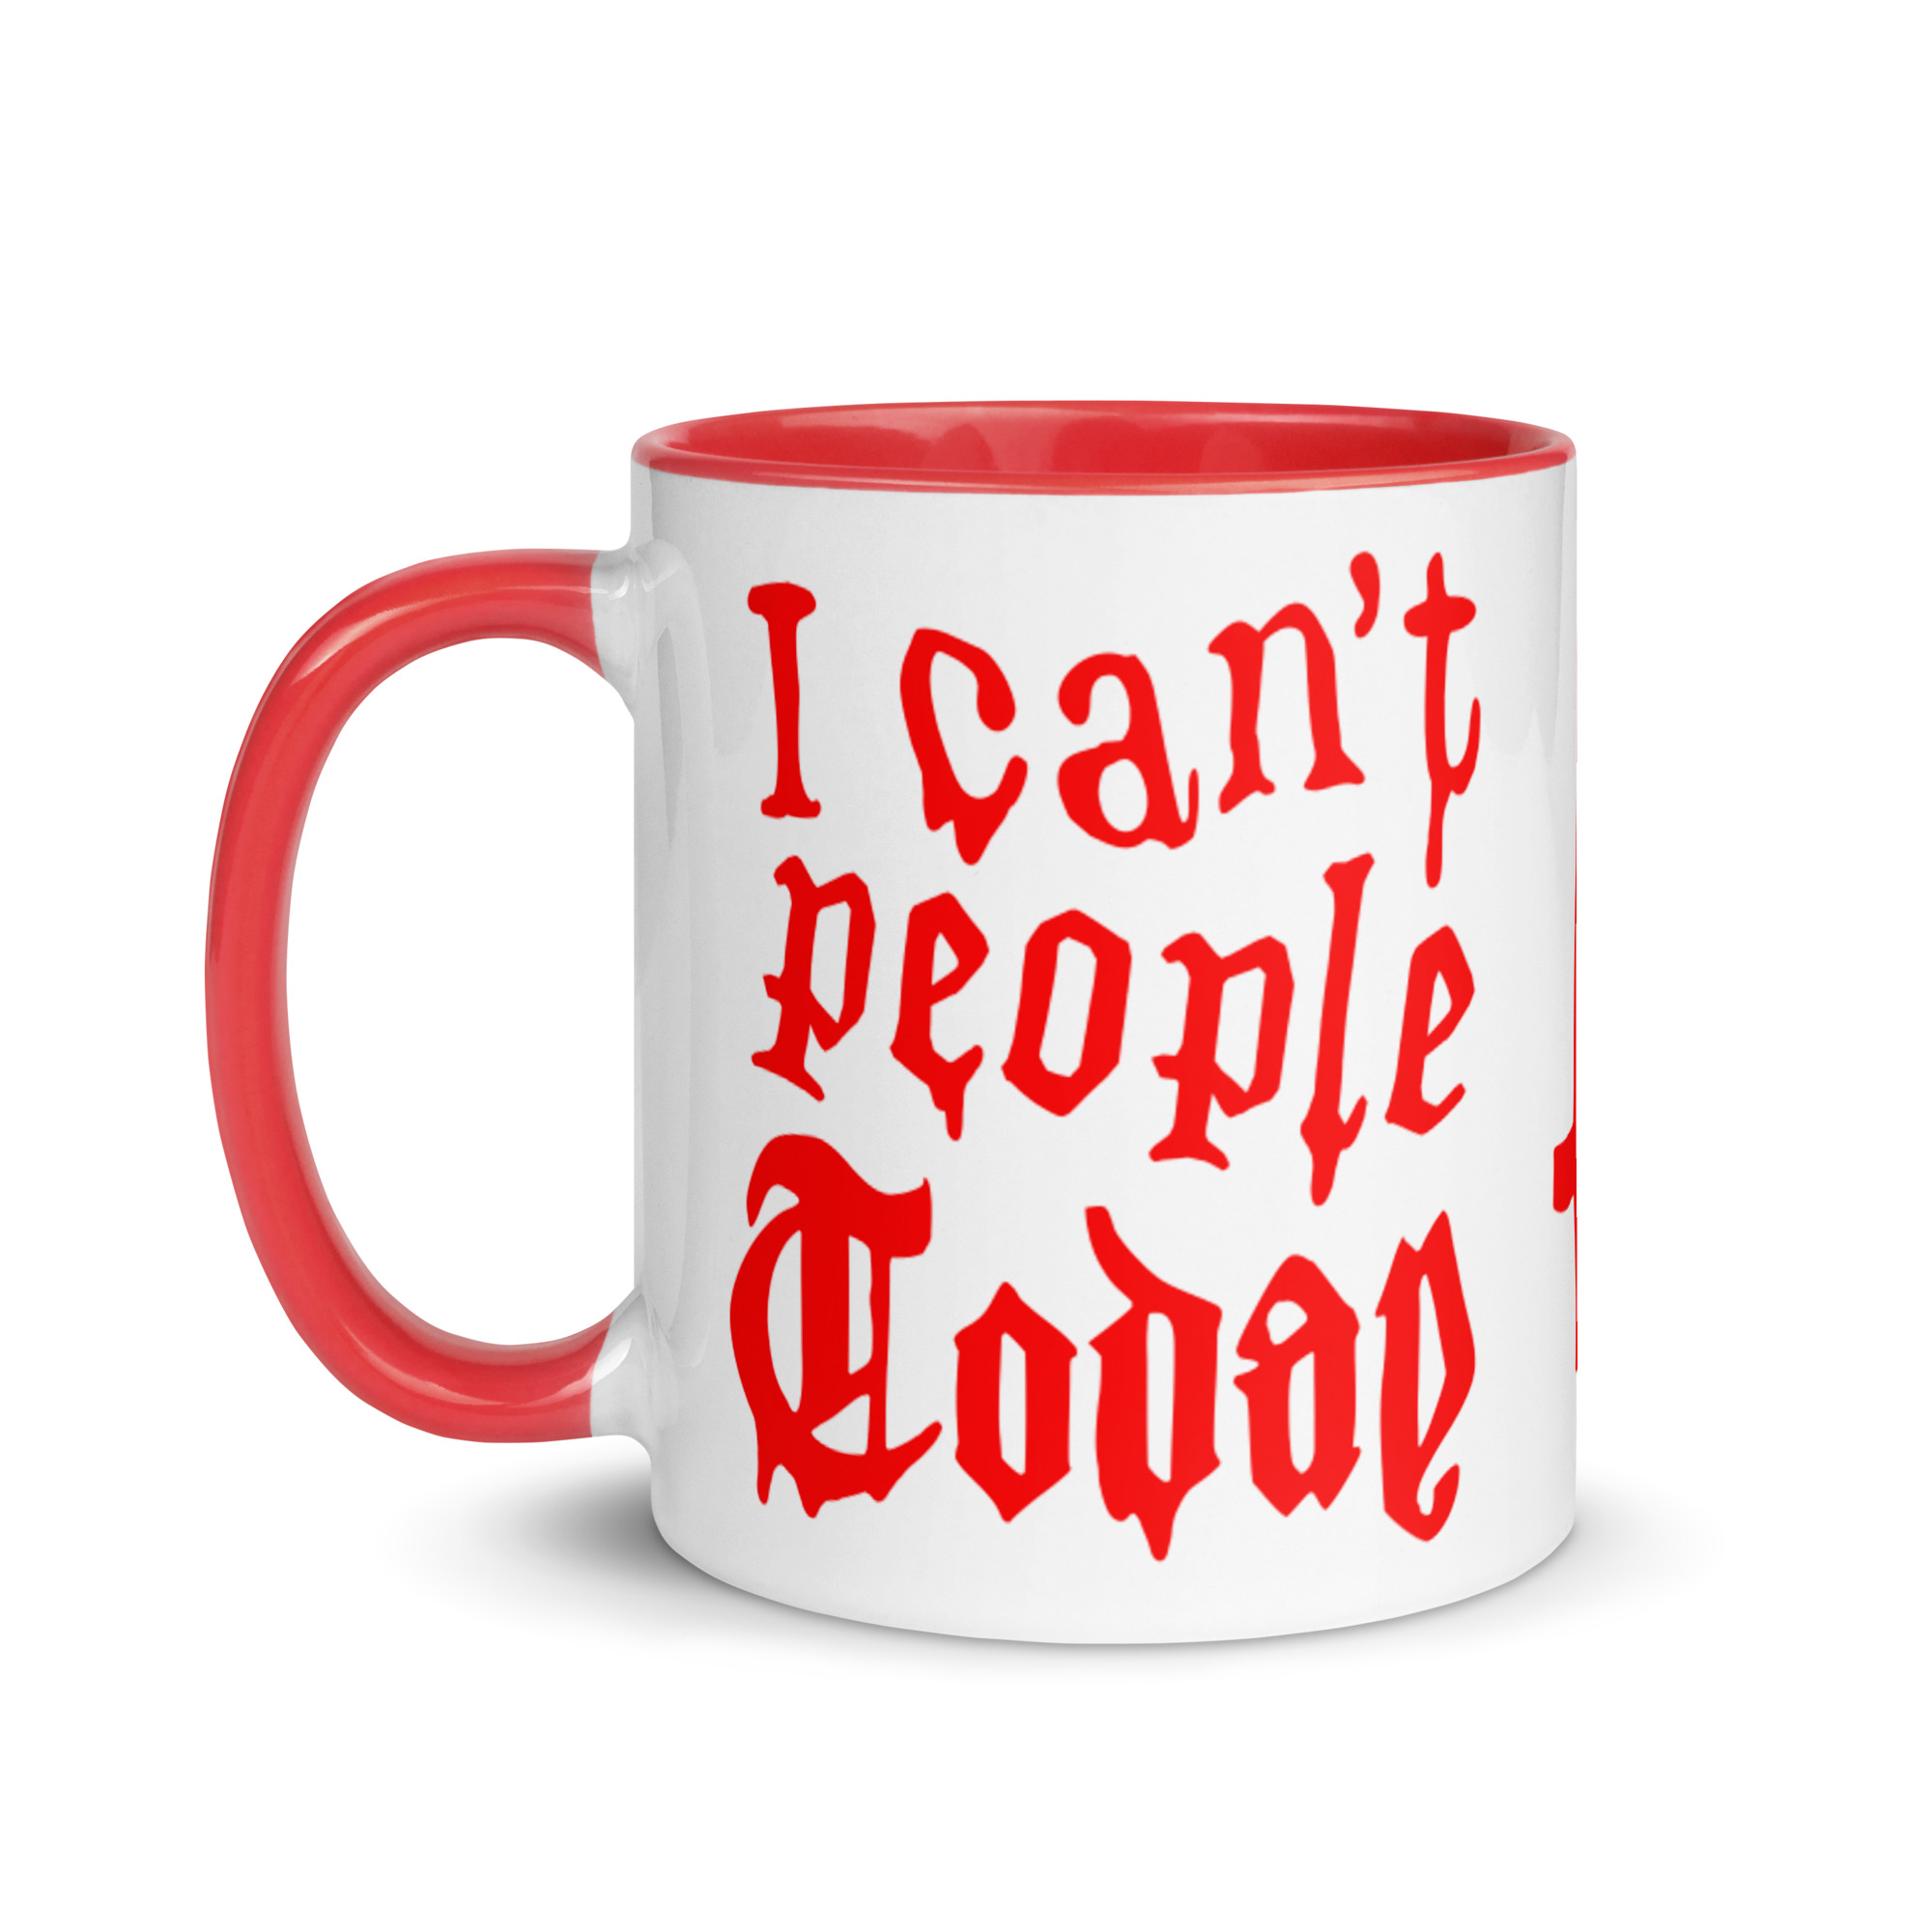 Featured image for “I can’t people today - Mug”